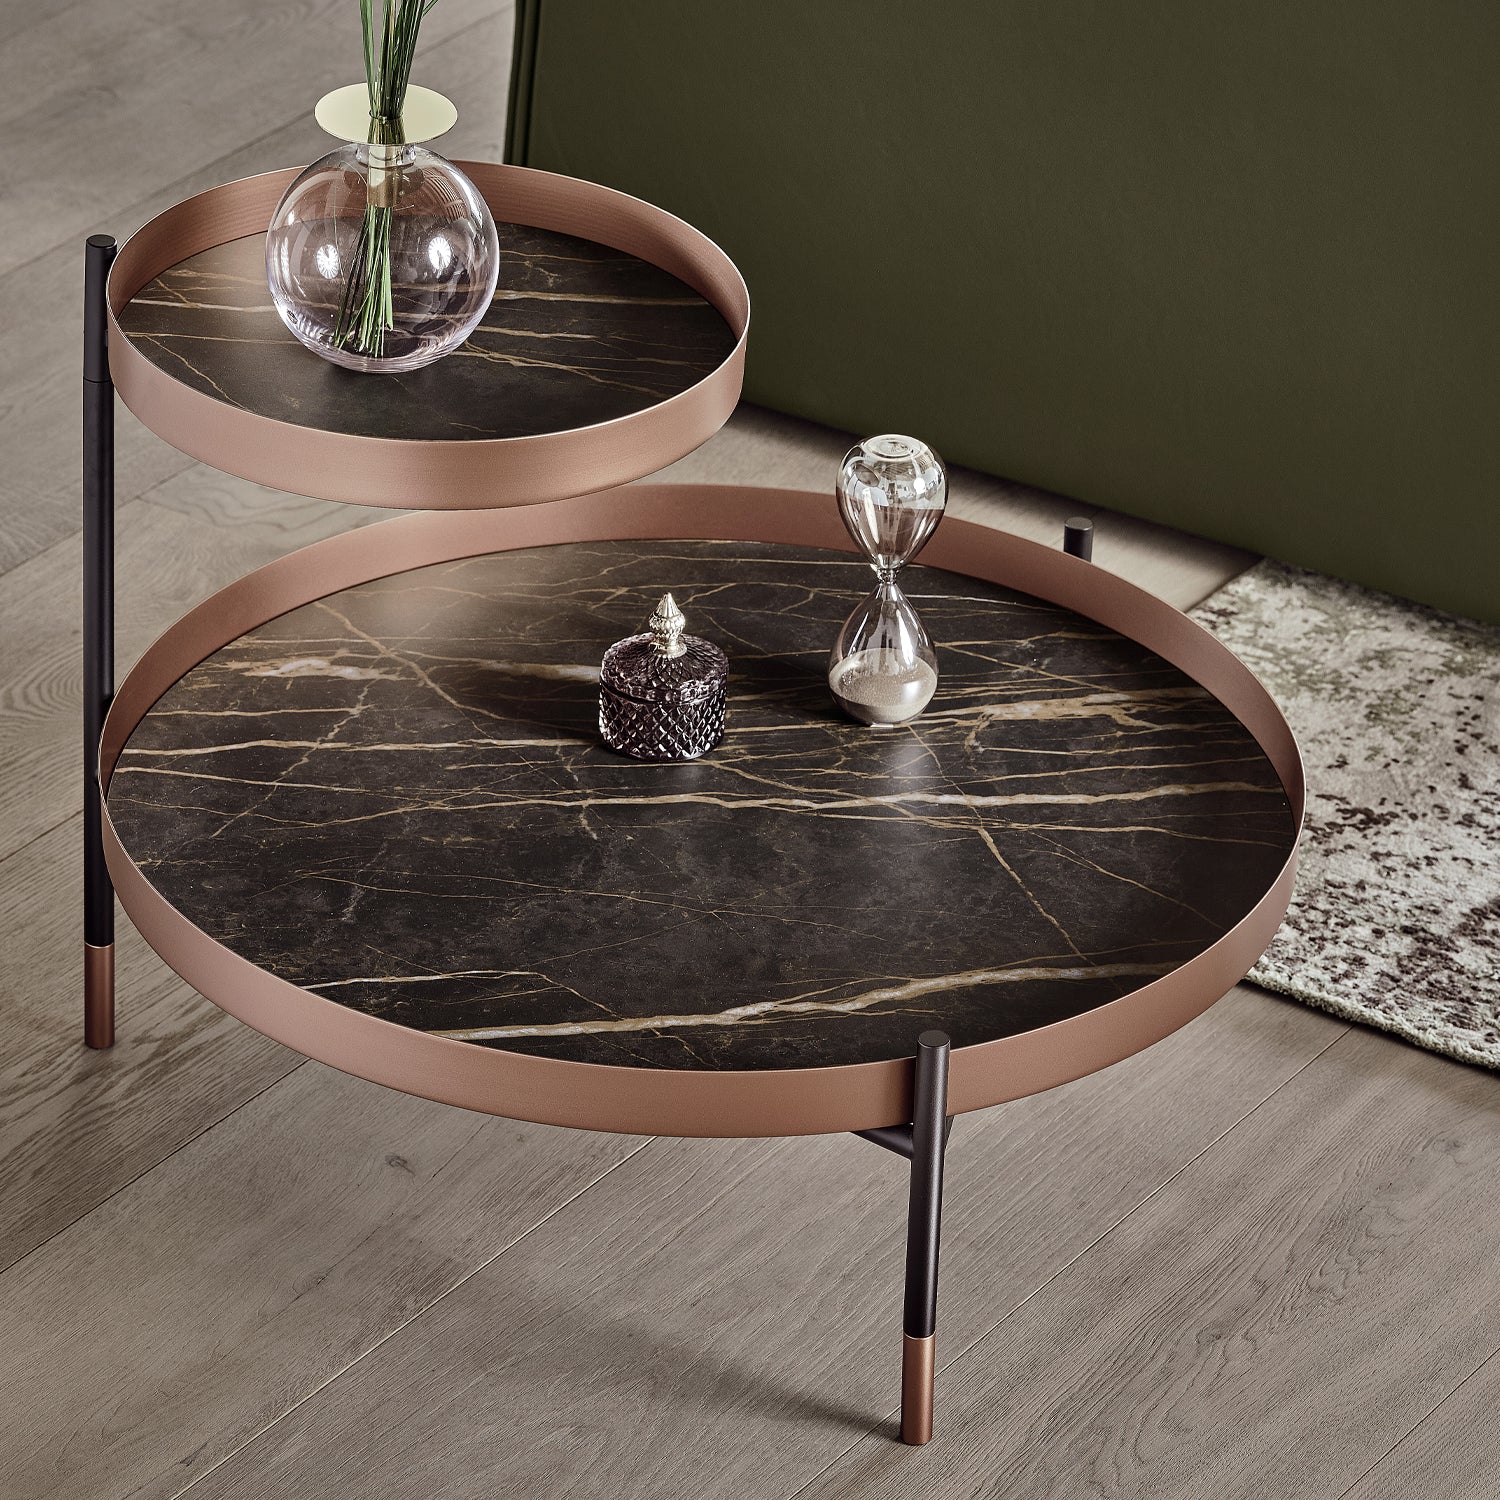 Planet Coffee Table By Bontempi Casa - Rose Gold Finish